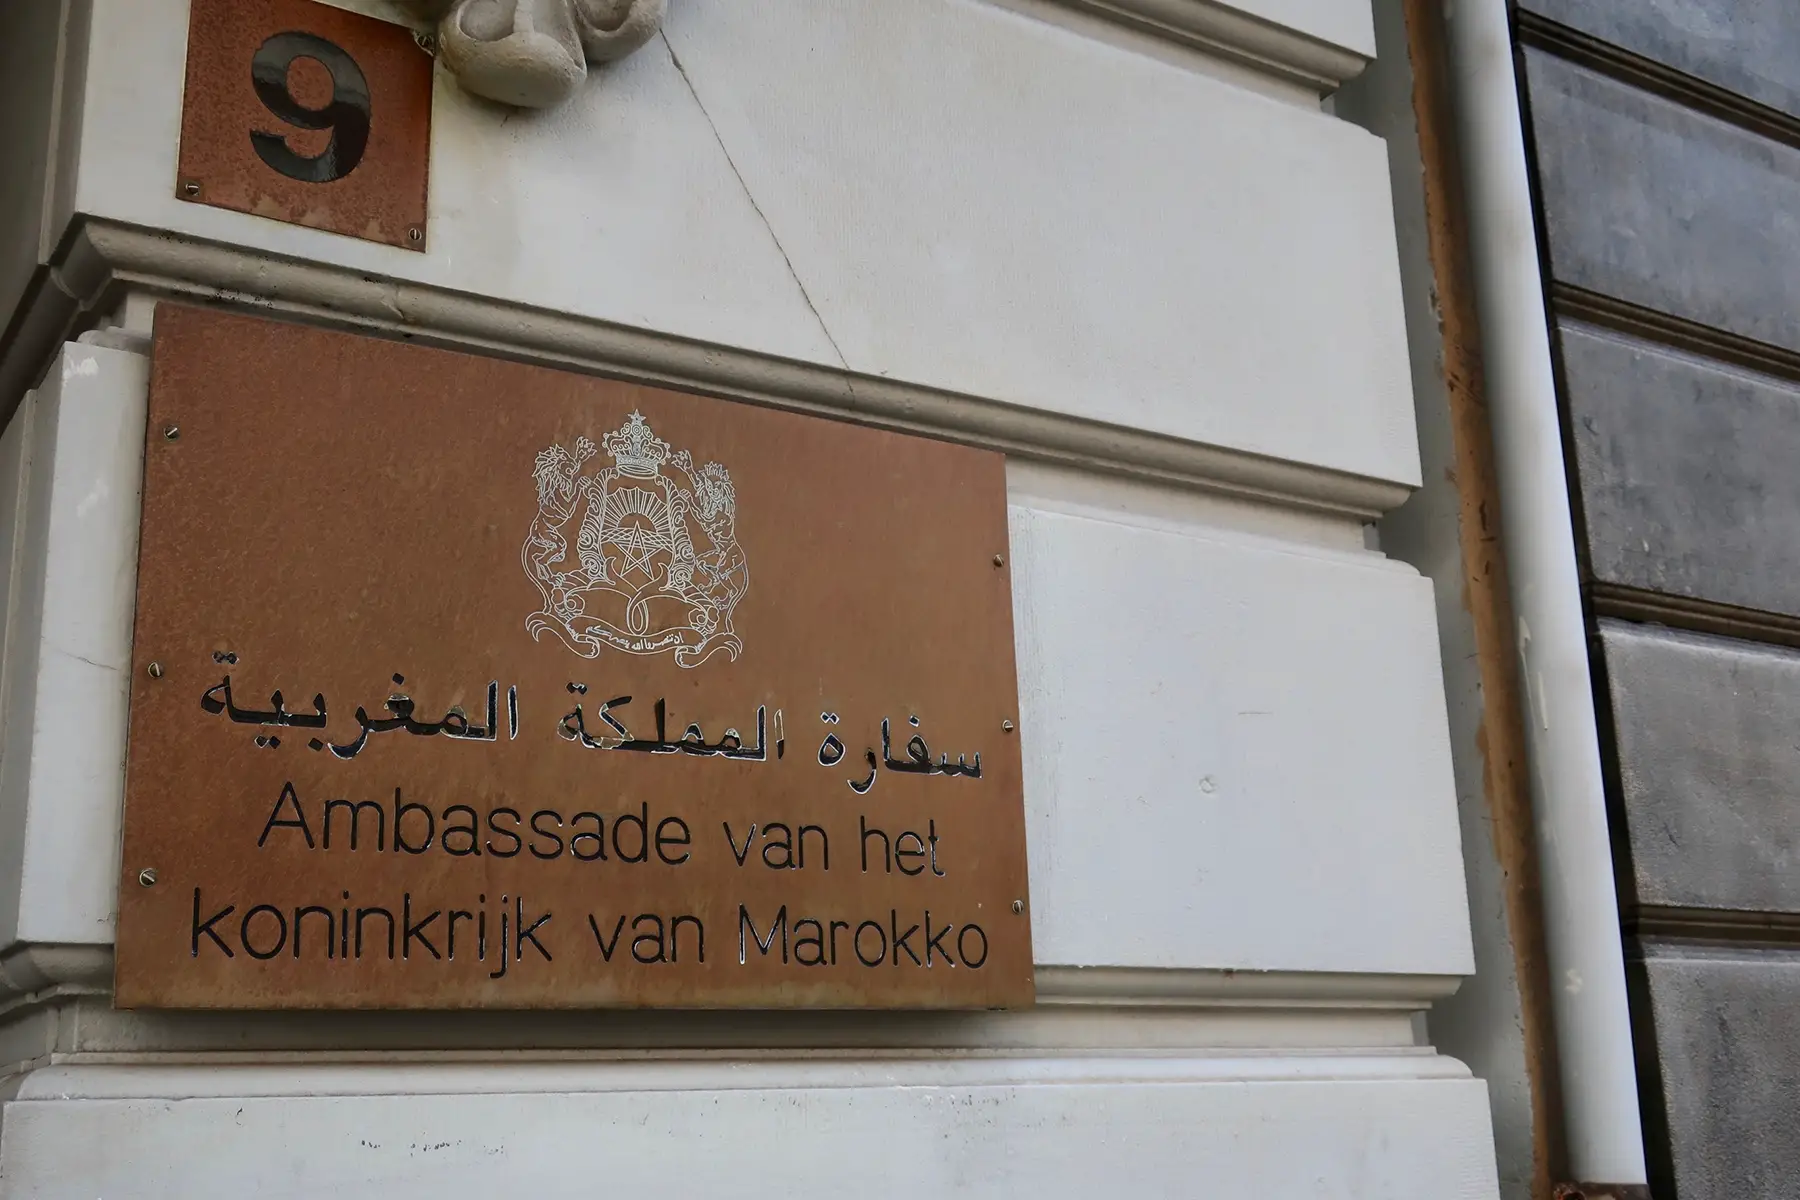 Moroccan Embassy in The Hague, Netherlands